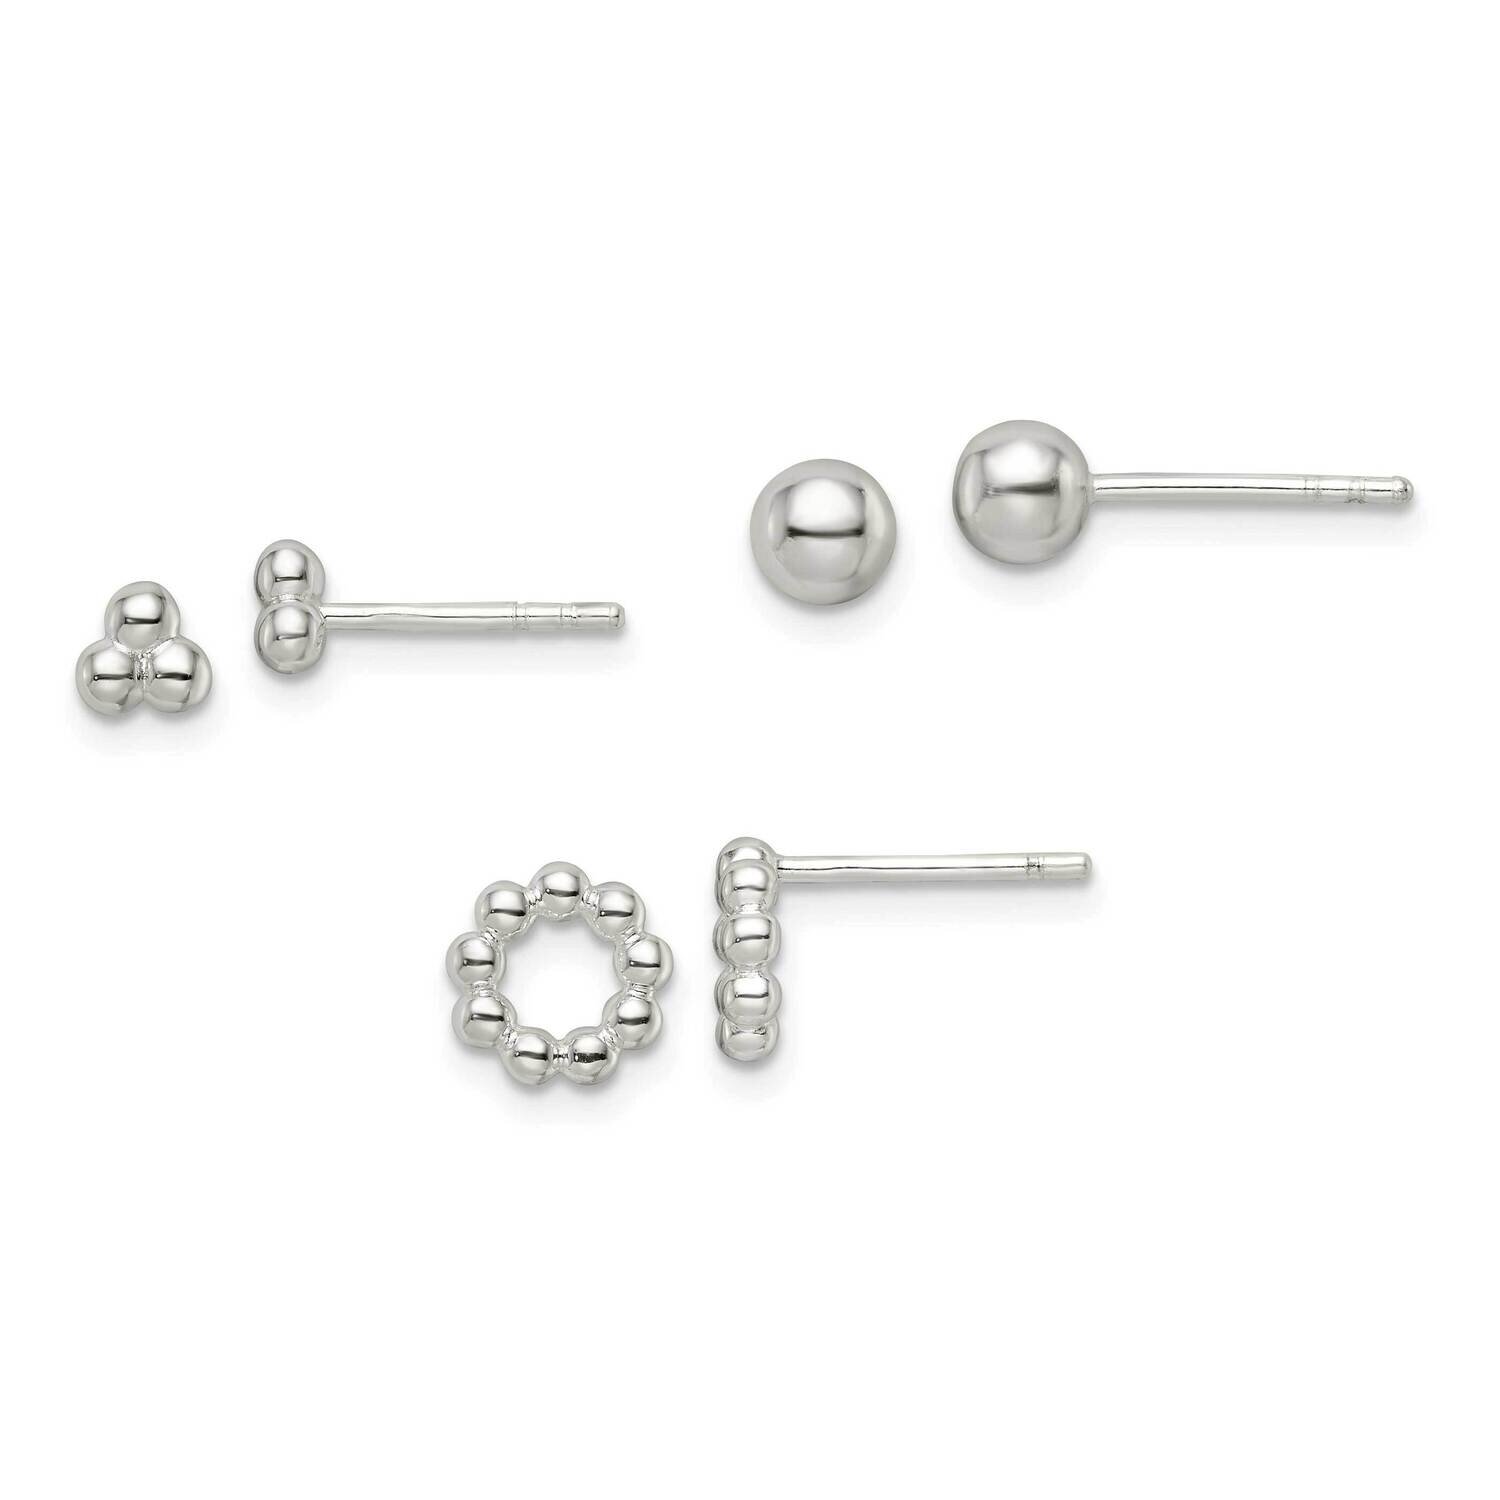 Beaded and Stud Post Earring Set Sterling Silver QE15991